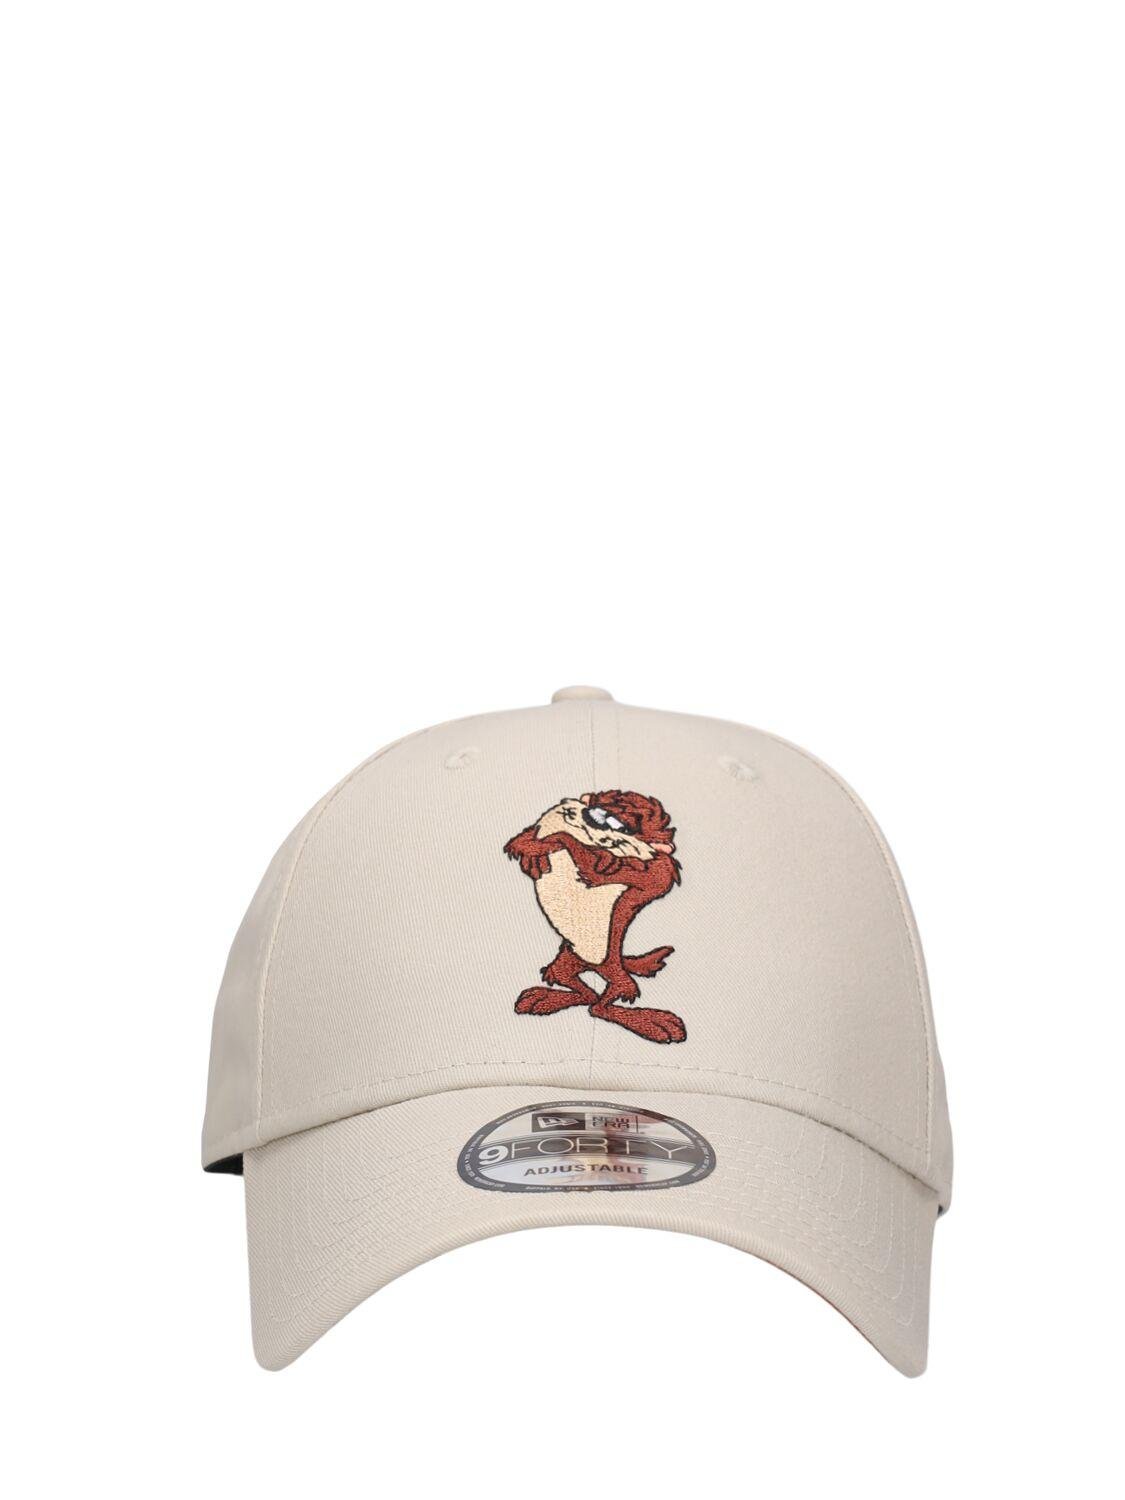 Taz Looney Tunes 9forty Cotton Cap by NEW ERA